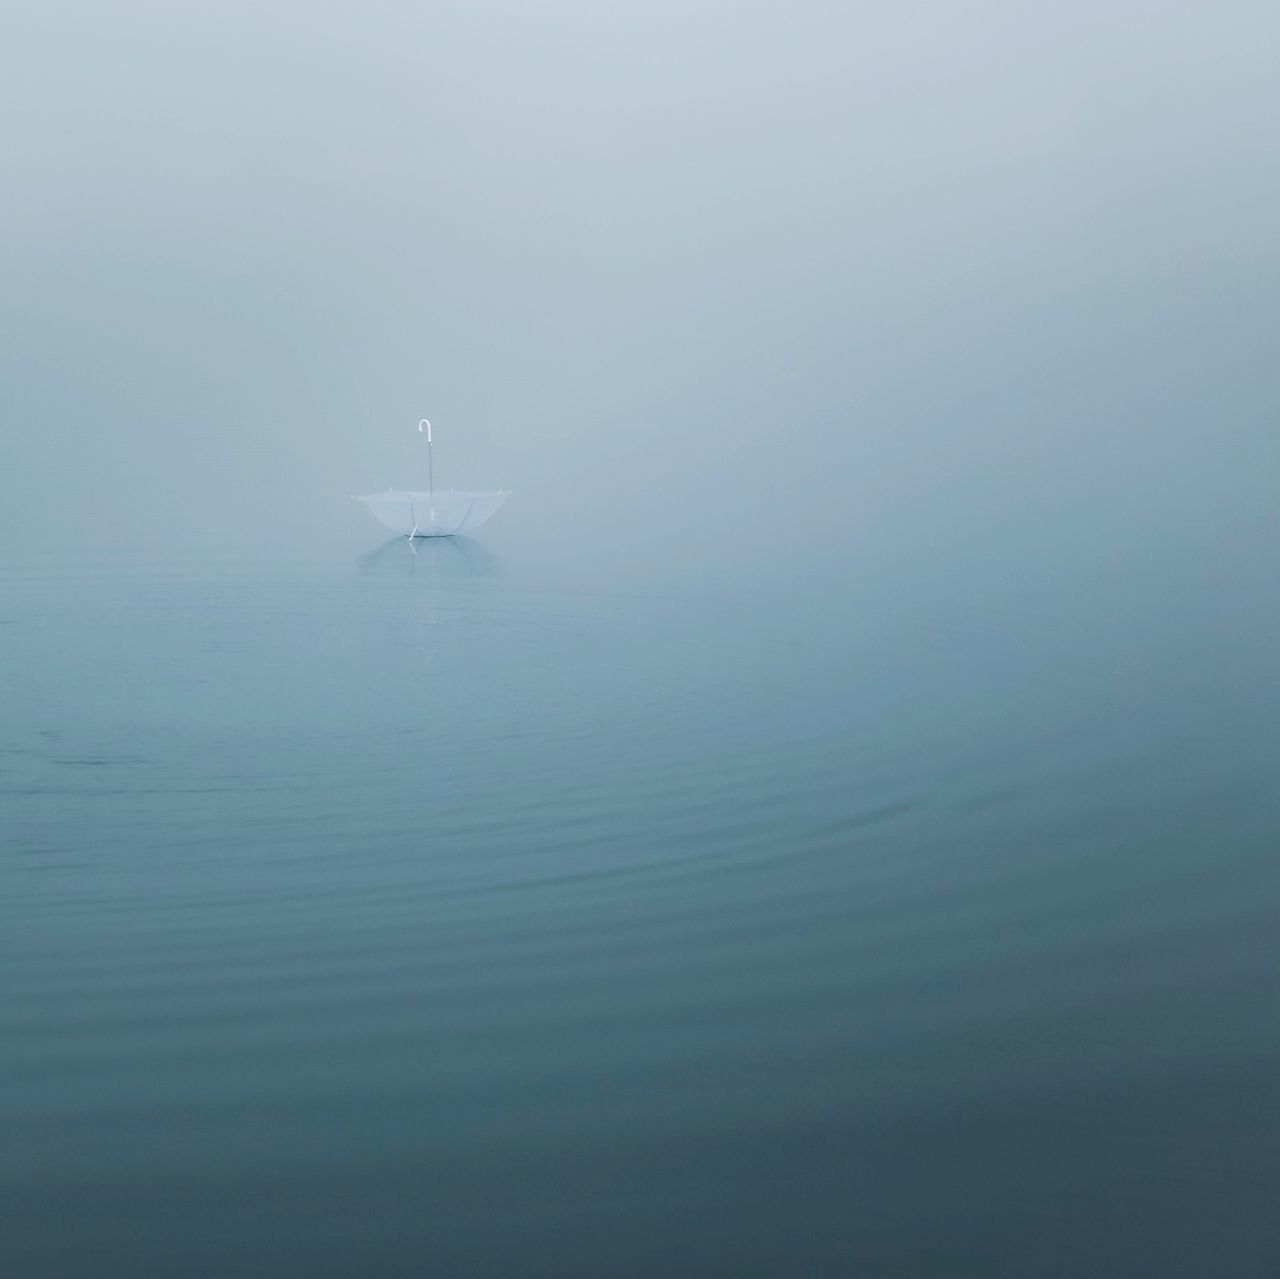 water, waterfront, tranquility, tranquil scene, fog, scenics, nature, foggy, beauty in nature, sky, day, idyllic, outdoors, no people, rippled, weather, remote, calm, non-urban scene, seascape, ocean